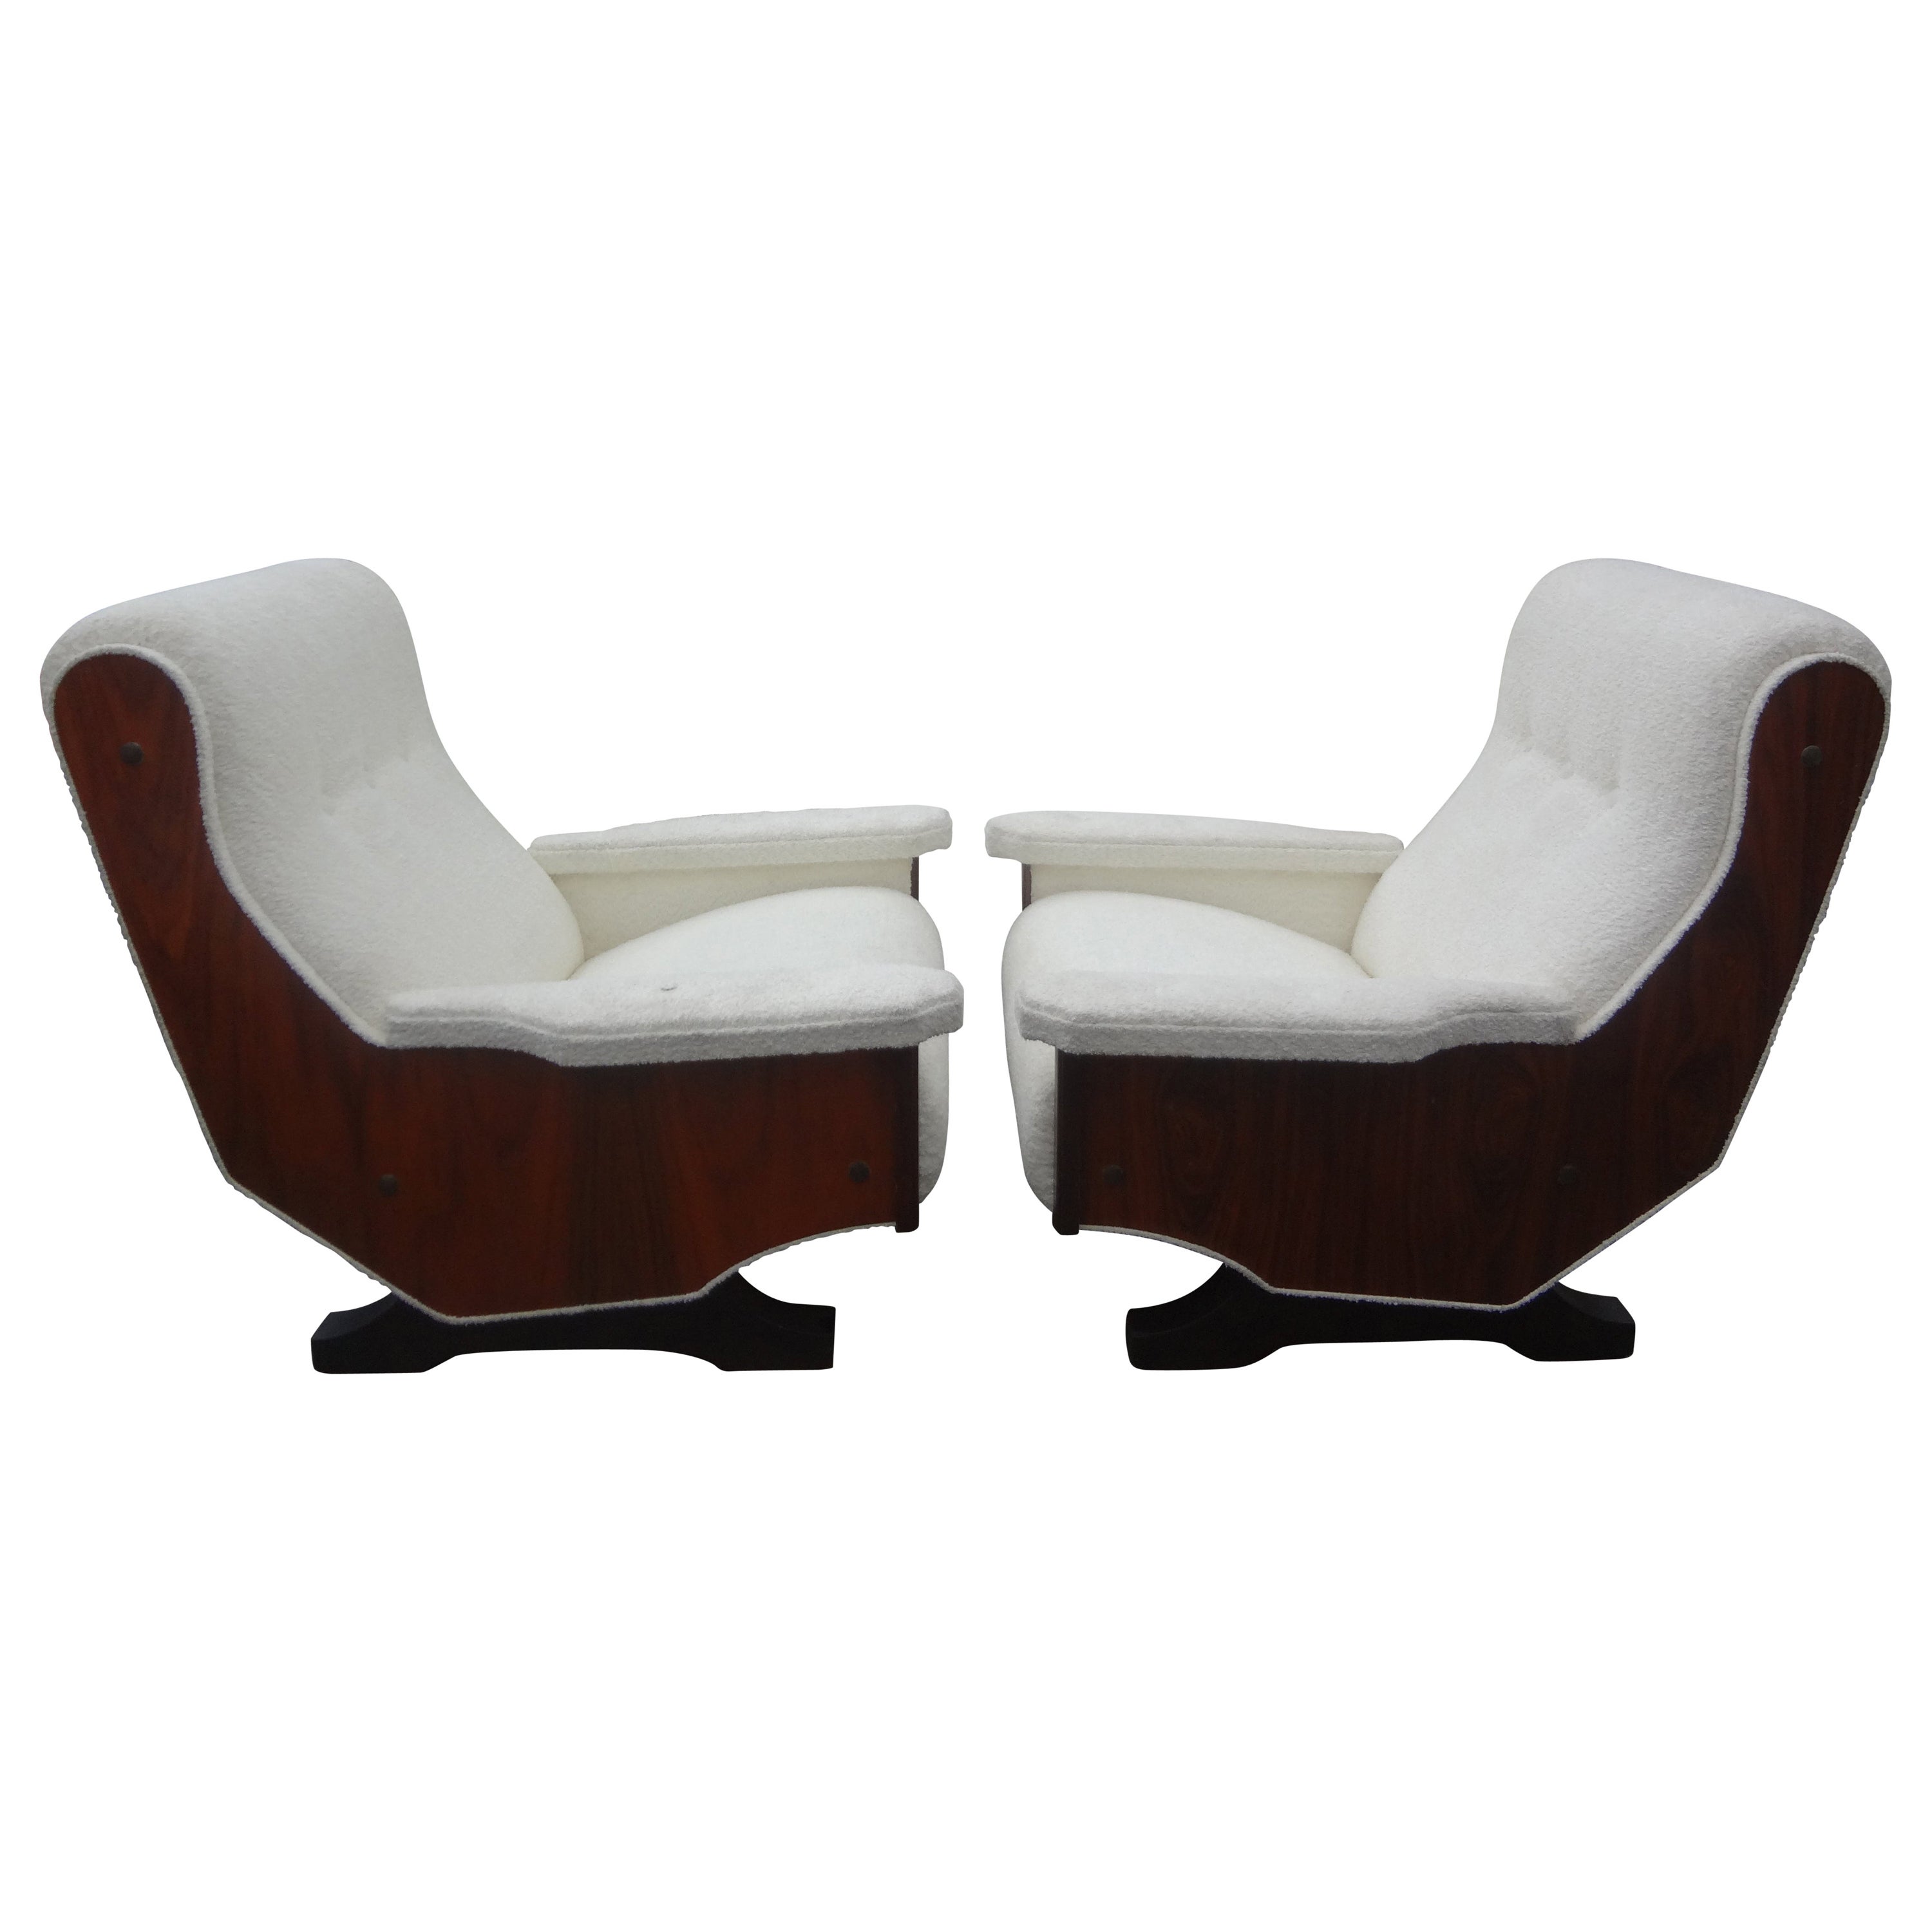 Pair of Italian Modern Sculptural Lounge Chairs Inspired By Paolo Buffa For Sale